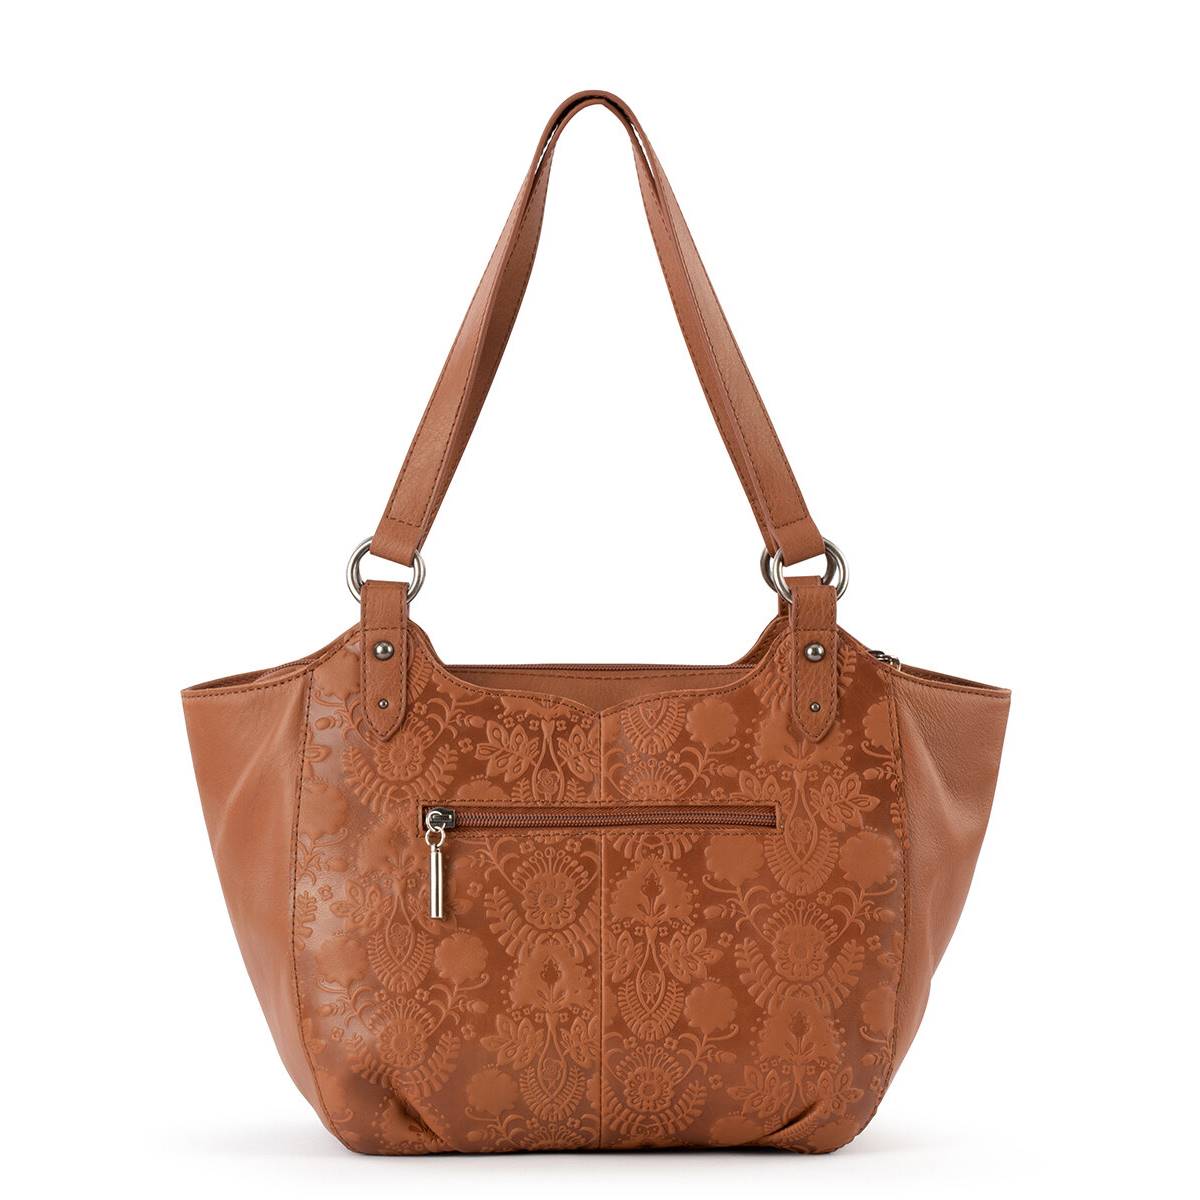 The Sak Bolinas Tote - Tabacco Floral Embossed